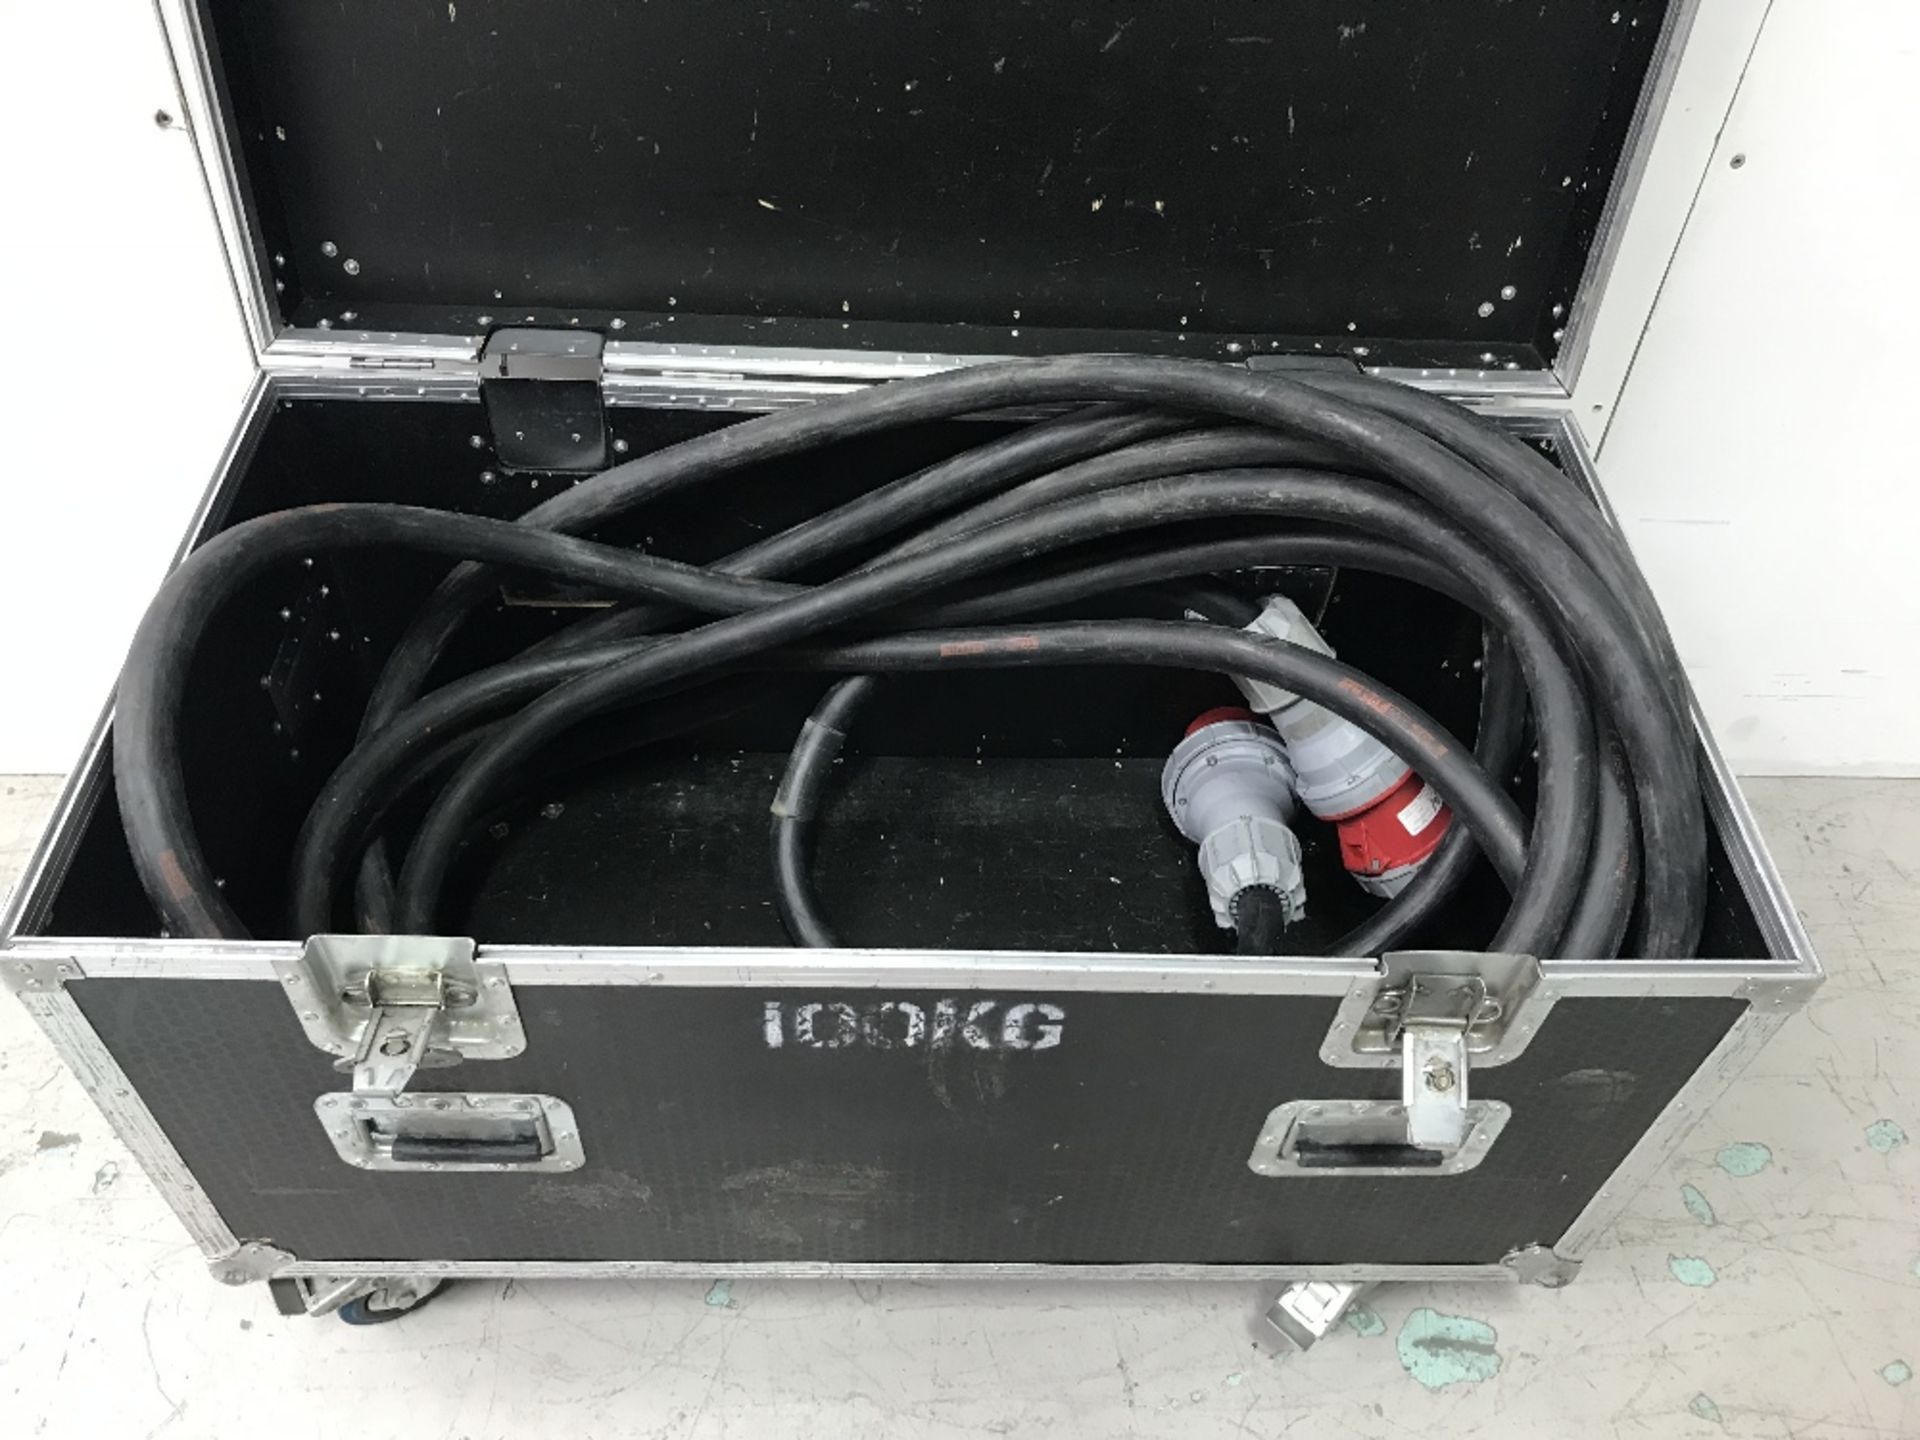 Euro Tour Grade 4ft Mobile Cable Trunk With Contents 20m 125/3ph Cable